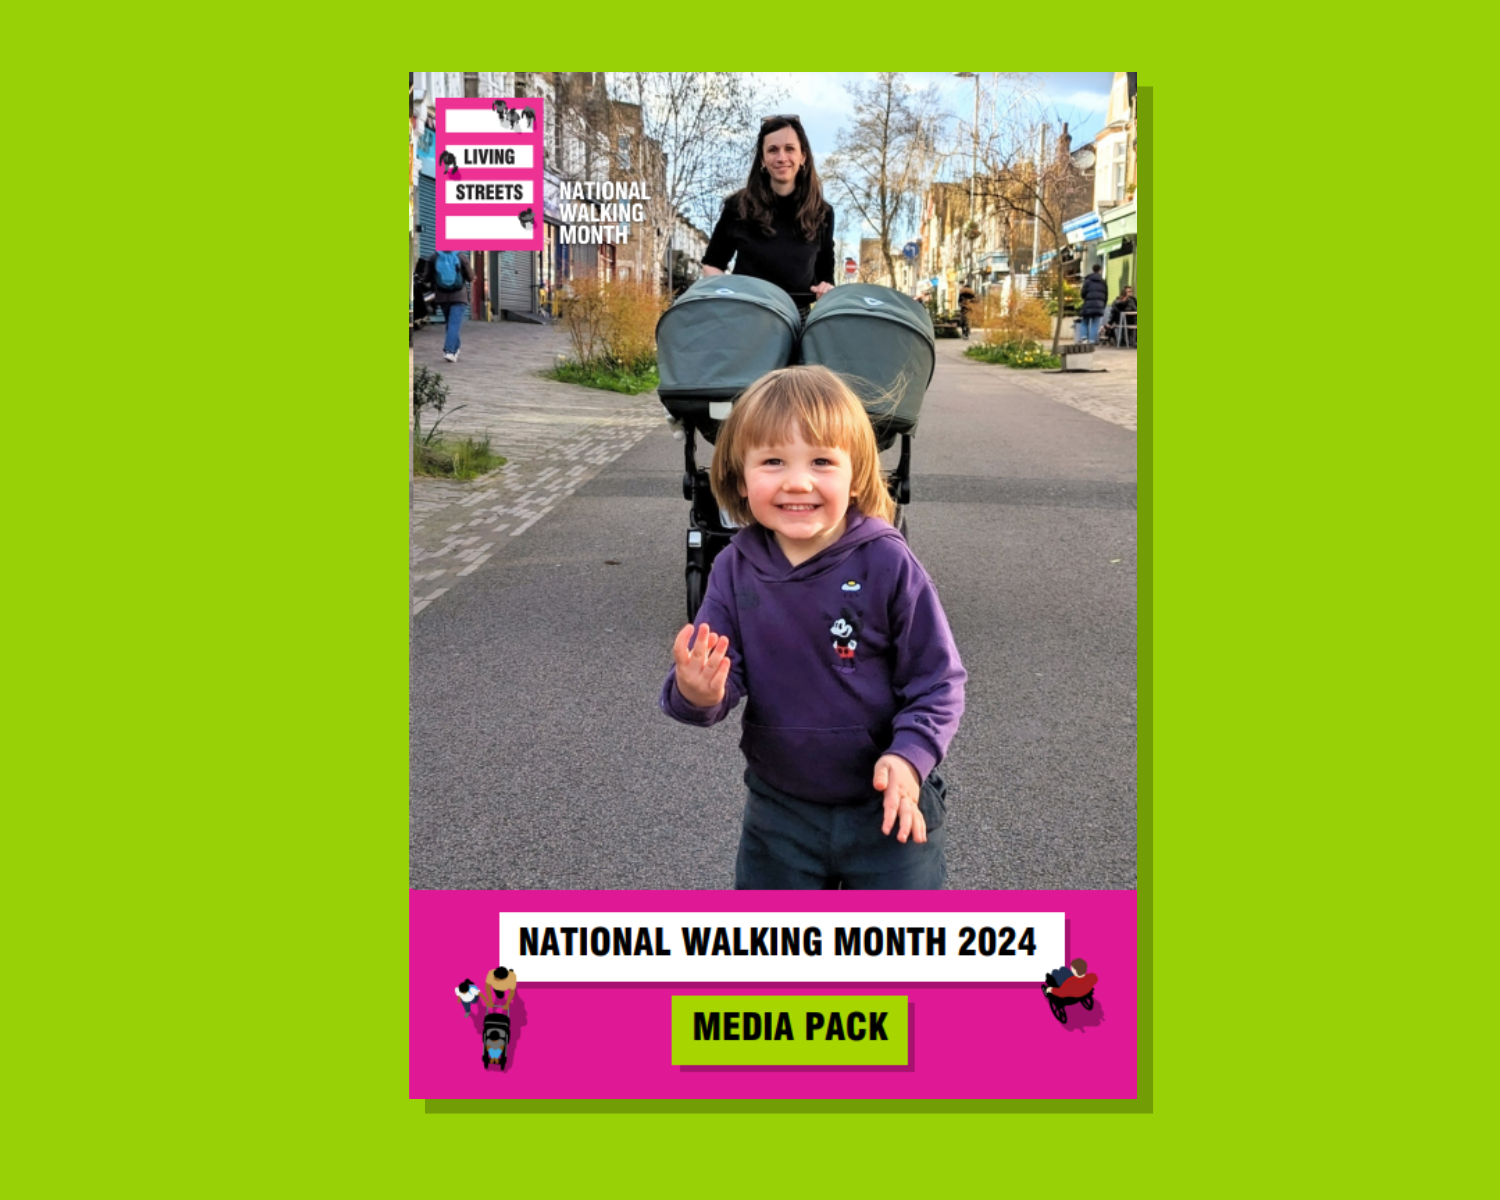 A young child smiles and waves in the foreground with a woman behind him on a street, featuring text about national walking month 2024 and a "media pack" label.